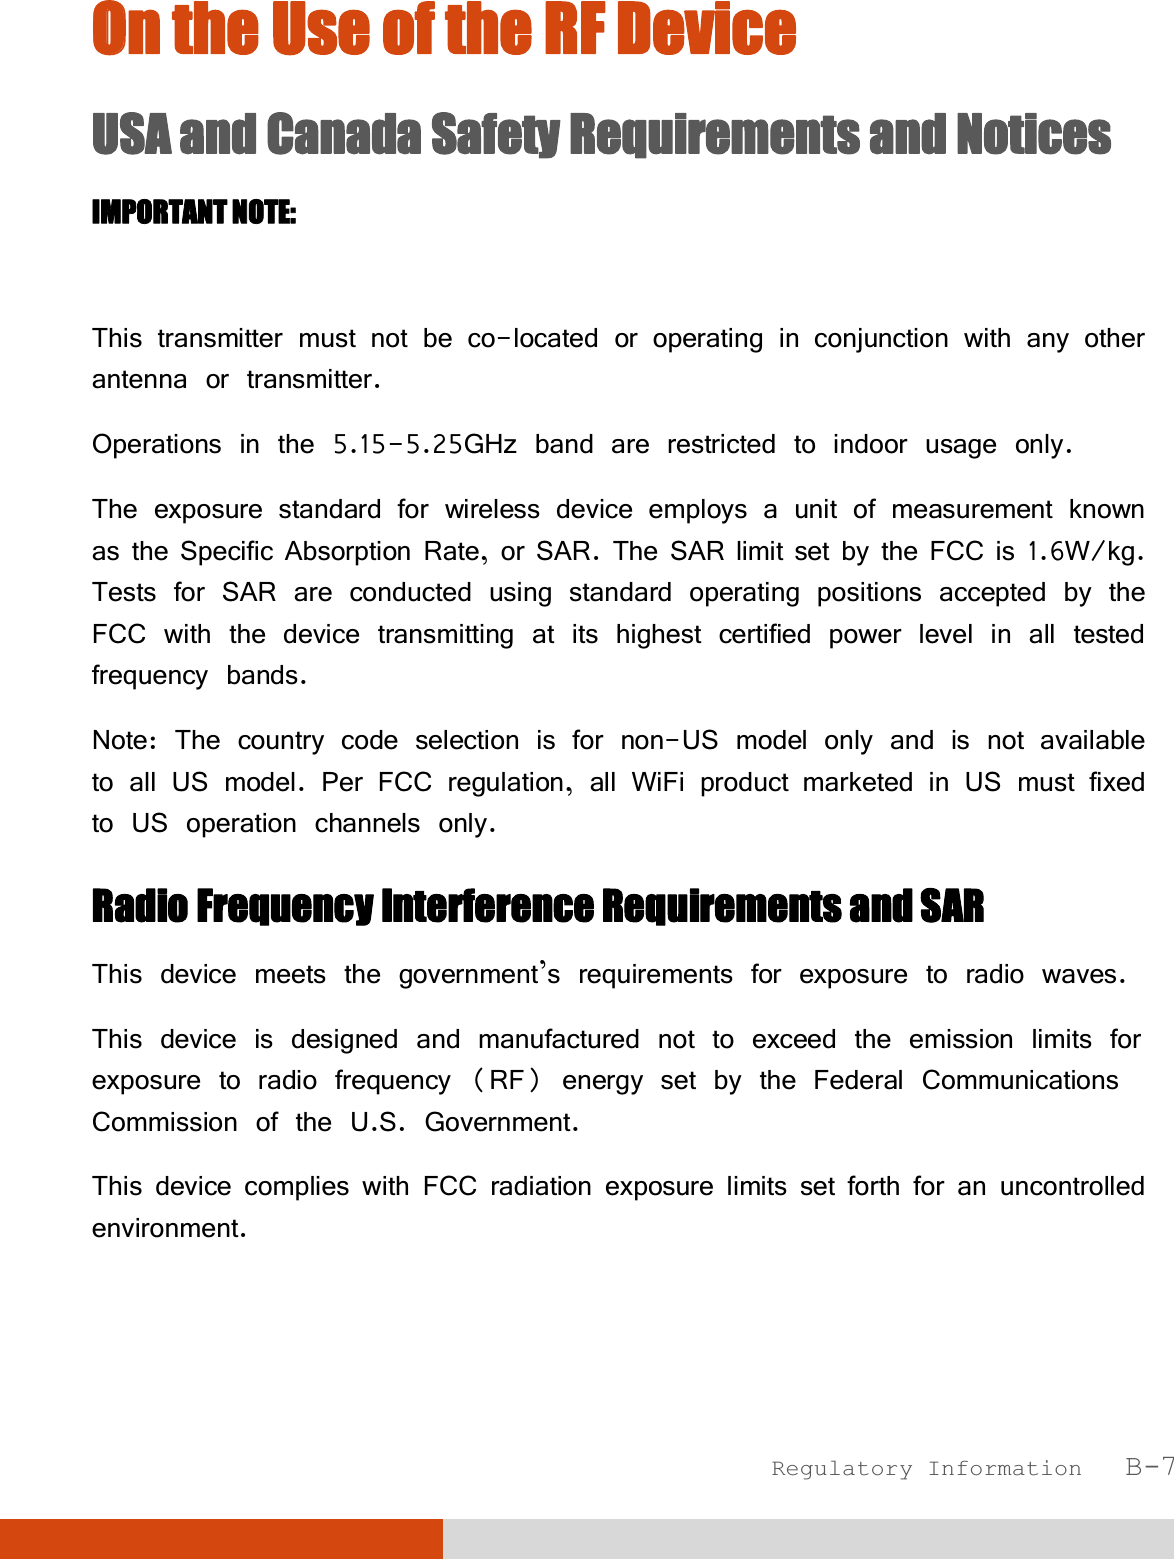  Regulatory Information   B-7 OOn the Use of the RF Device USA and Canada Safety Requirements and Notices IMPORTANT NOTE:   This transmitter must not be co-located or operating in conjunction with any other antenna or transmitter. Operations in the 5.15-5.25GHz band are restricted to indoor usage only. The exposure standard for wireless device employs a unit of measurement known as the Specific Absorption Rate, or SAR. The SAR limit set by the FCC is 1.6W/kg. Tests for SAR are conducted using standard operating positions accepted by the FCC with the device transmitting at its highest certified power level in all tested frequency bands. Note: The country code selection is for non-US model only and is not available to all US model. Per FCC regulation, all WiFi product marketed in US must fixed to US operation channels only. Radio Frequency Interference Requirements and SAR This device meets the government’s requirements for exposure to radio waves. This device is designed and manufactured not to exceed the emission limits for exposure to radio frequency (RF) energy set by the Federal Communications Commission of the U.S. Government. This device complies with FCC radiation exposure limits set forth for an uncontrolled environment. 